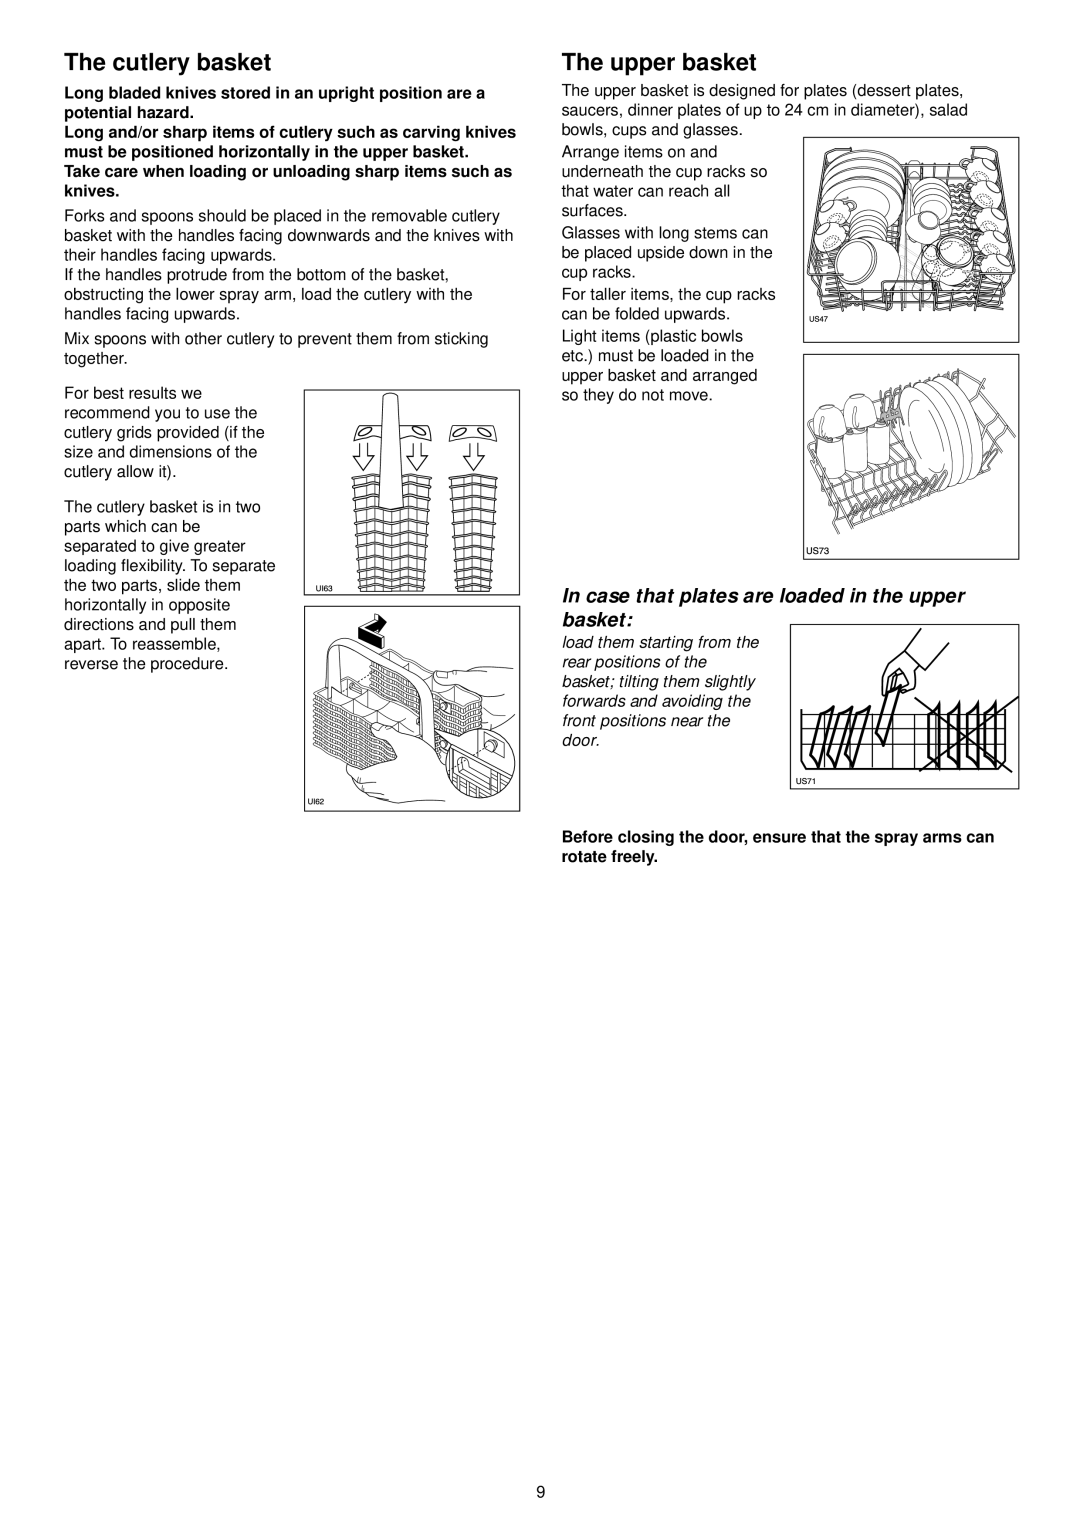 Zanussi ZSF 6126 manual The cutlery basket, The upper basket, In case that plates are loaded in the upper basket 